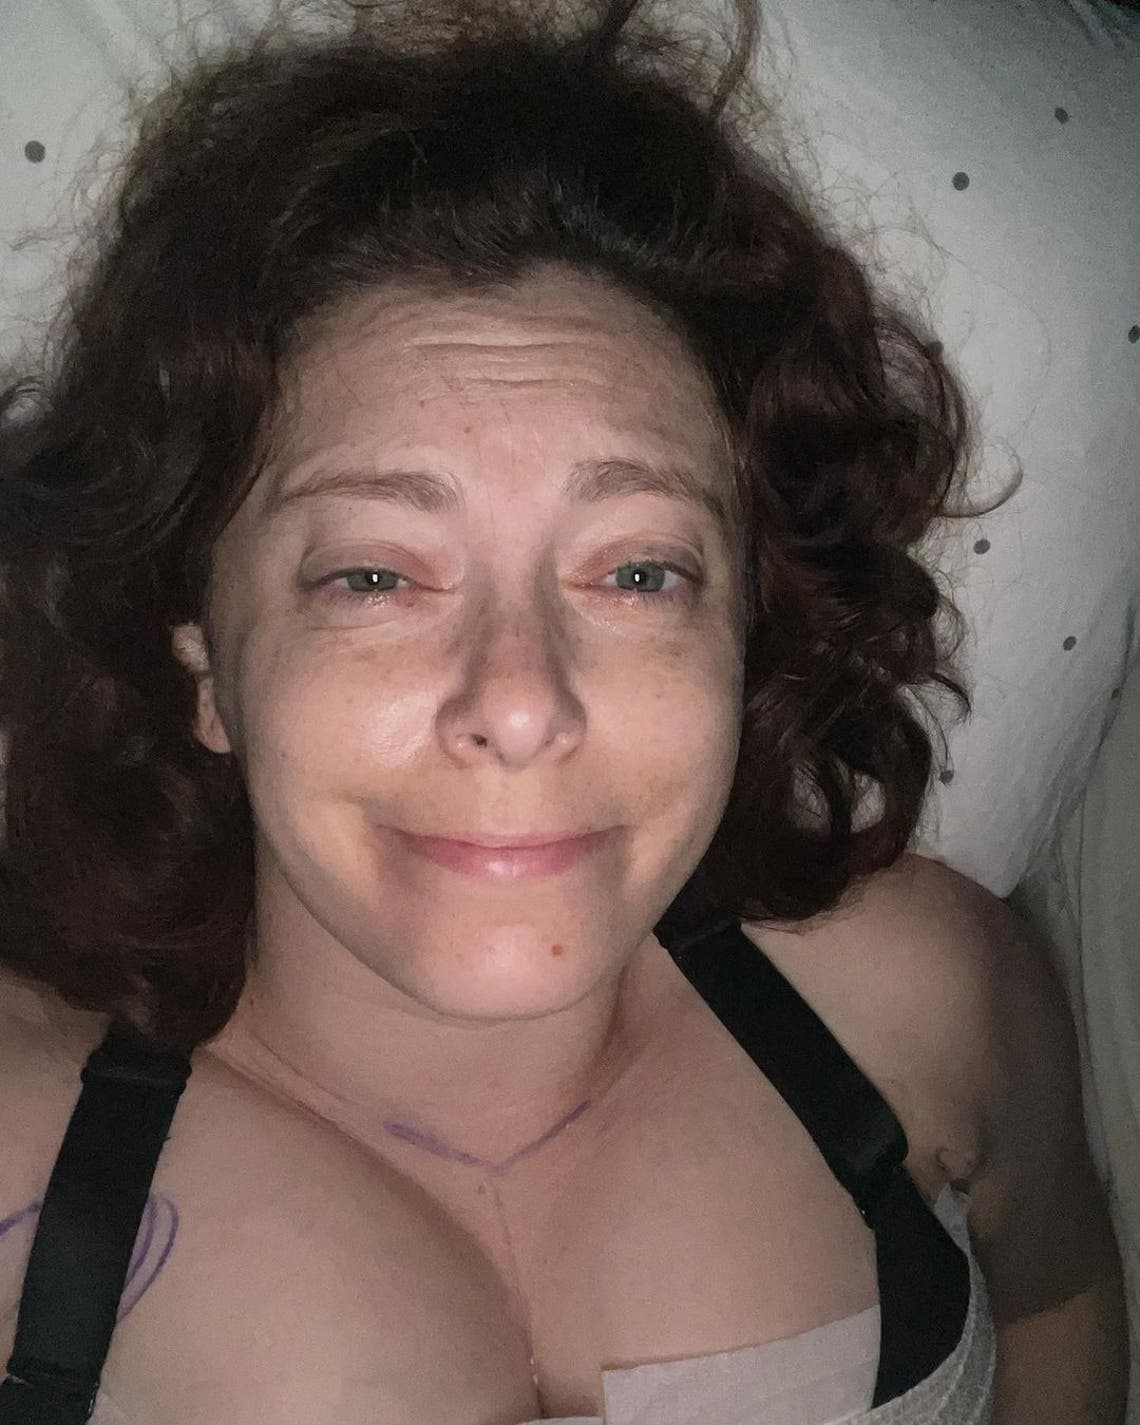 Leah McSweeney Shares Unedited 'Paper' Picture of Boob Scar